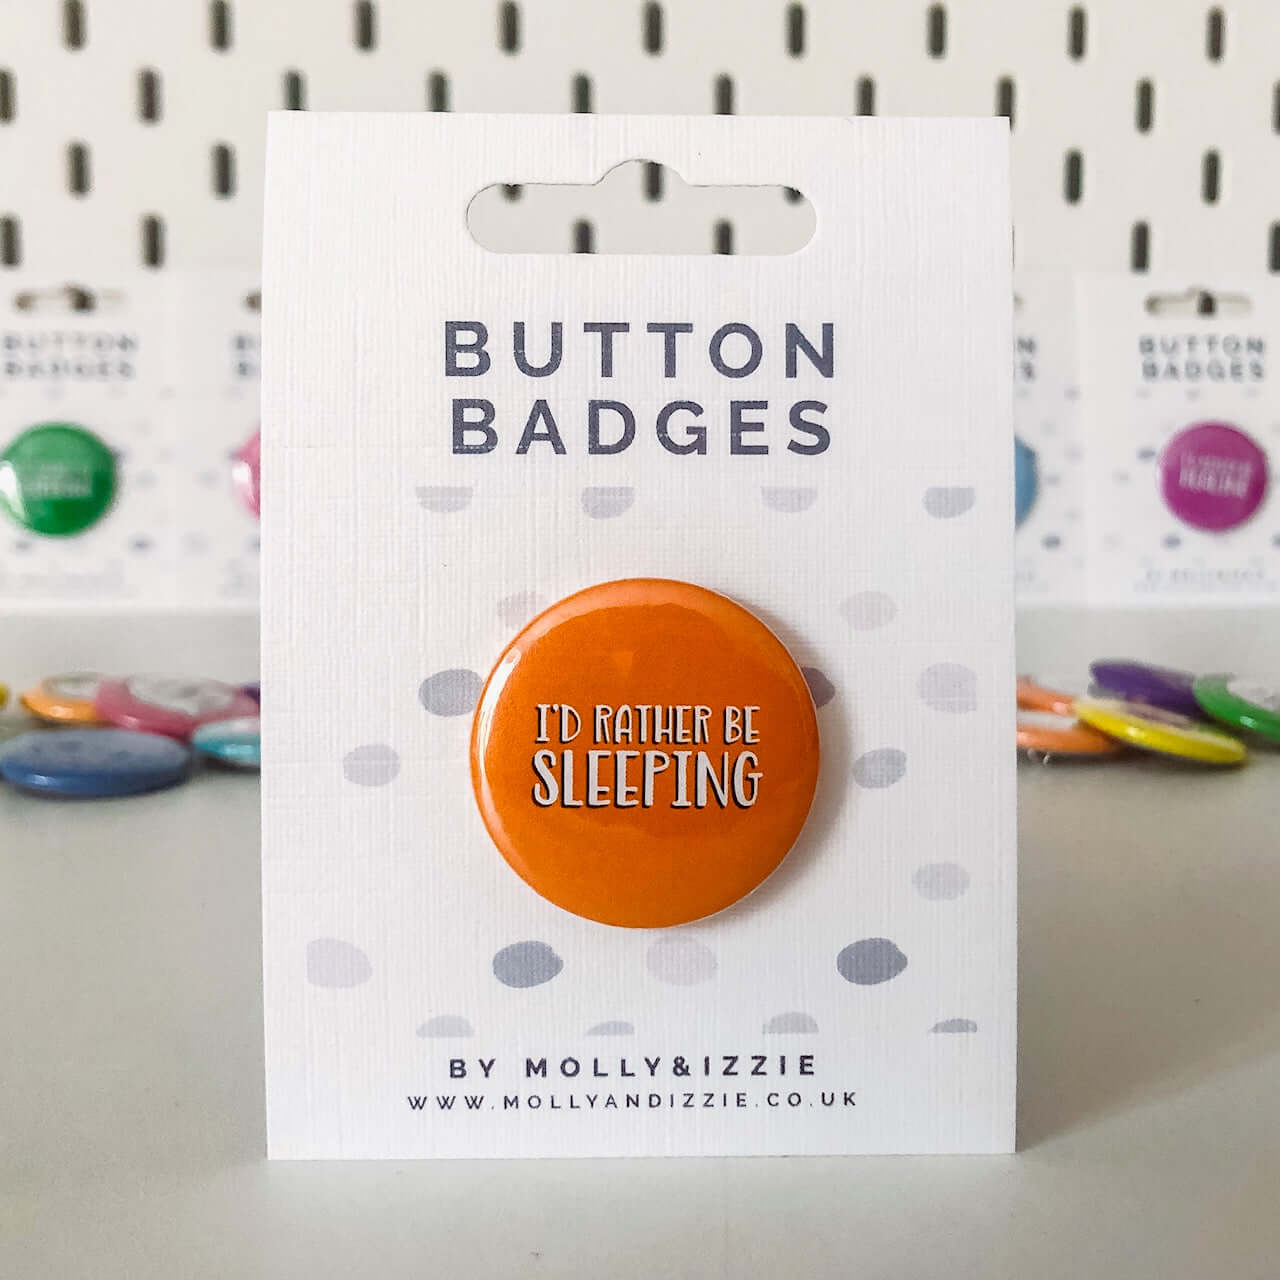 by Molly & Izzie I'd Rather Be Sleeping Button Badge Button Badge By Molly & Izzie